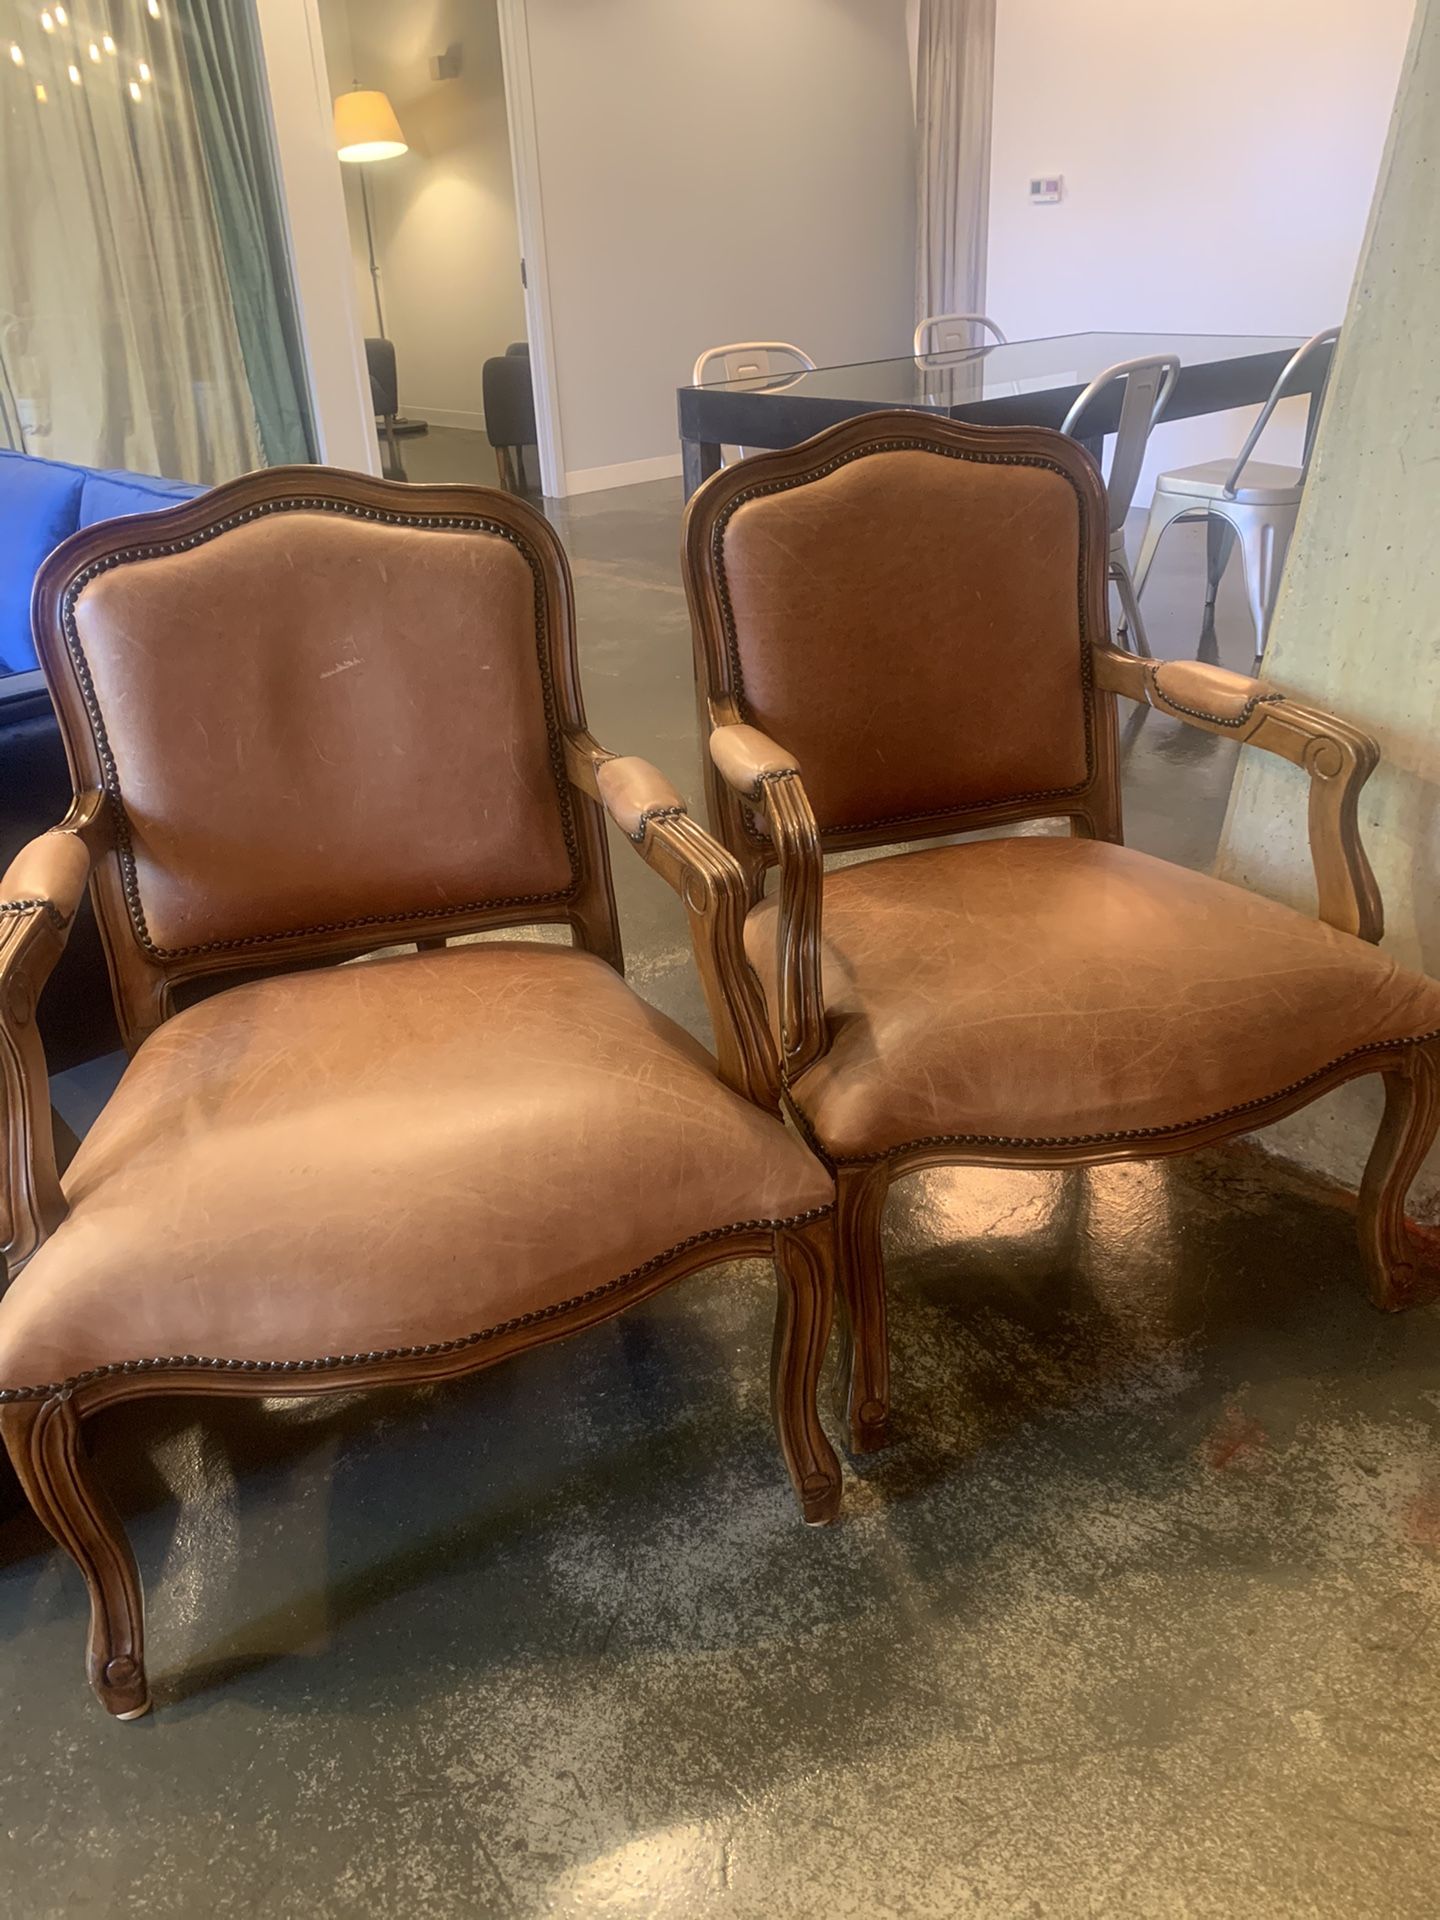 Antique chairs (2) for sale!